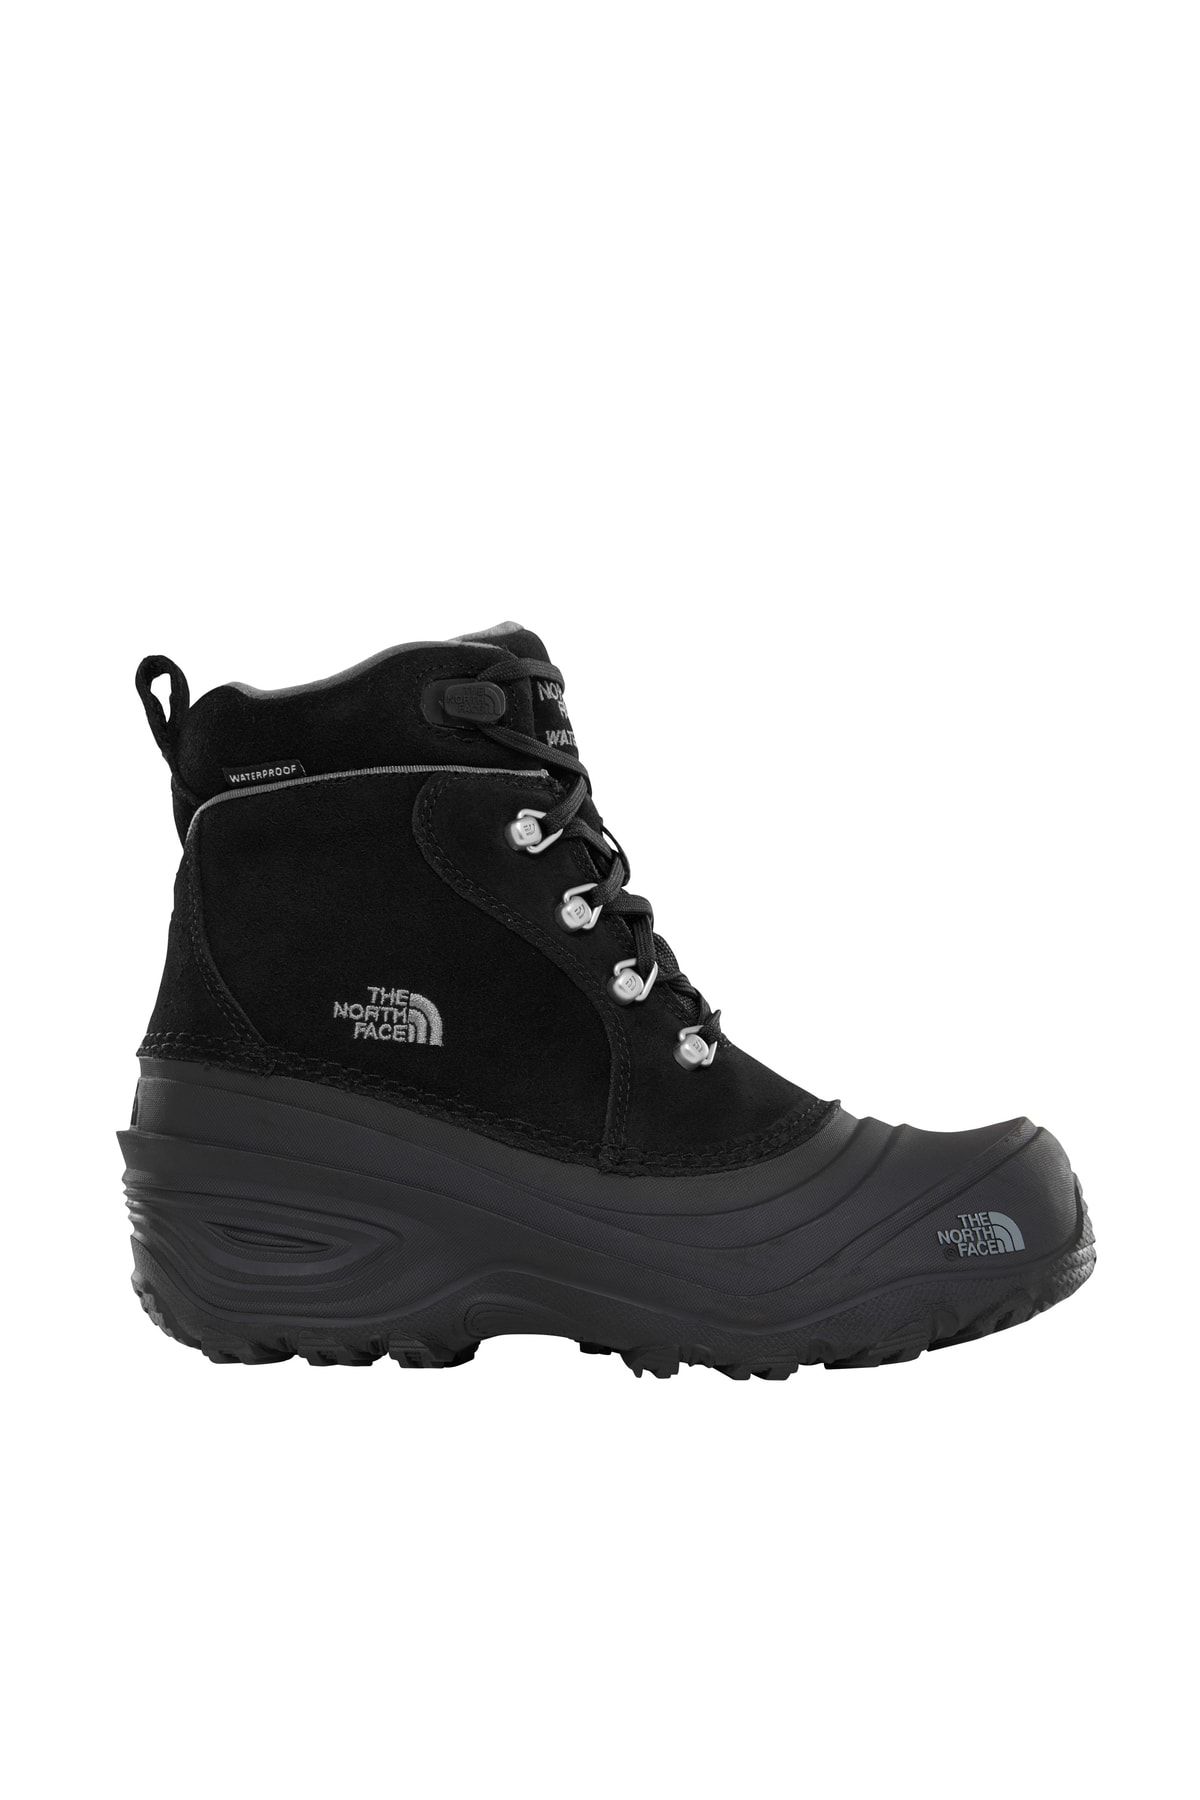 The North Face Y Chilkat Lace Iı Çocuk Siyah2 Outdoor Ayakkabı Nf0a2t5rkz21